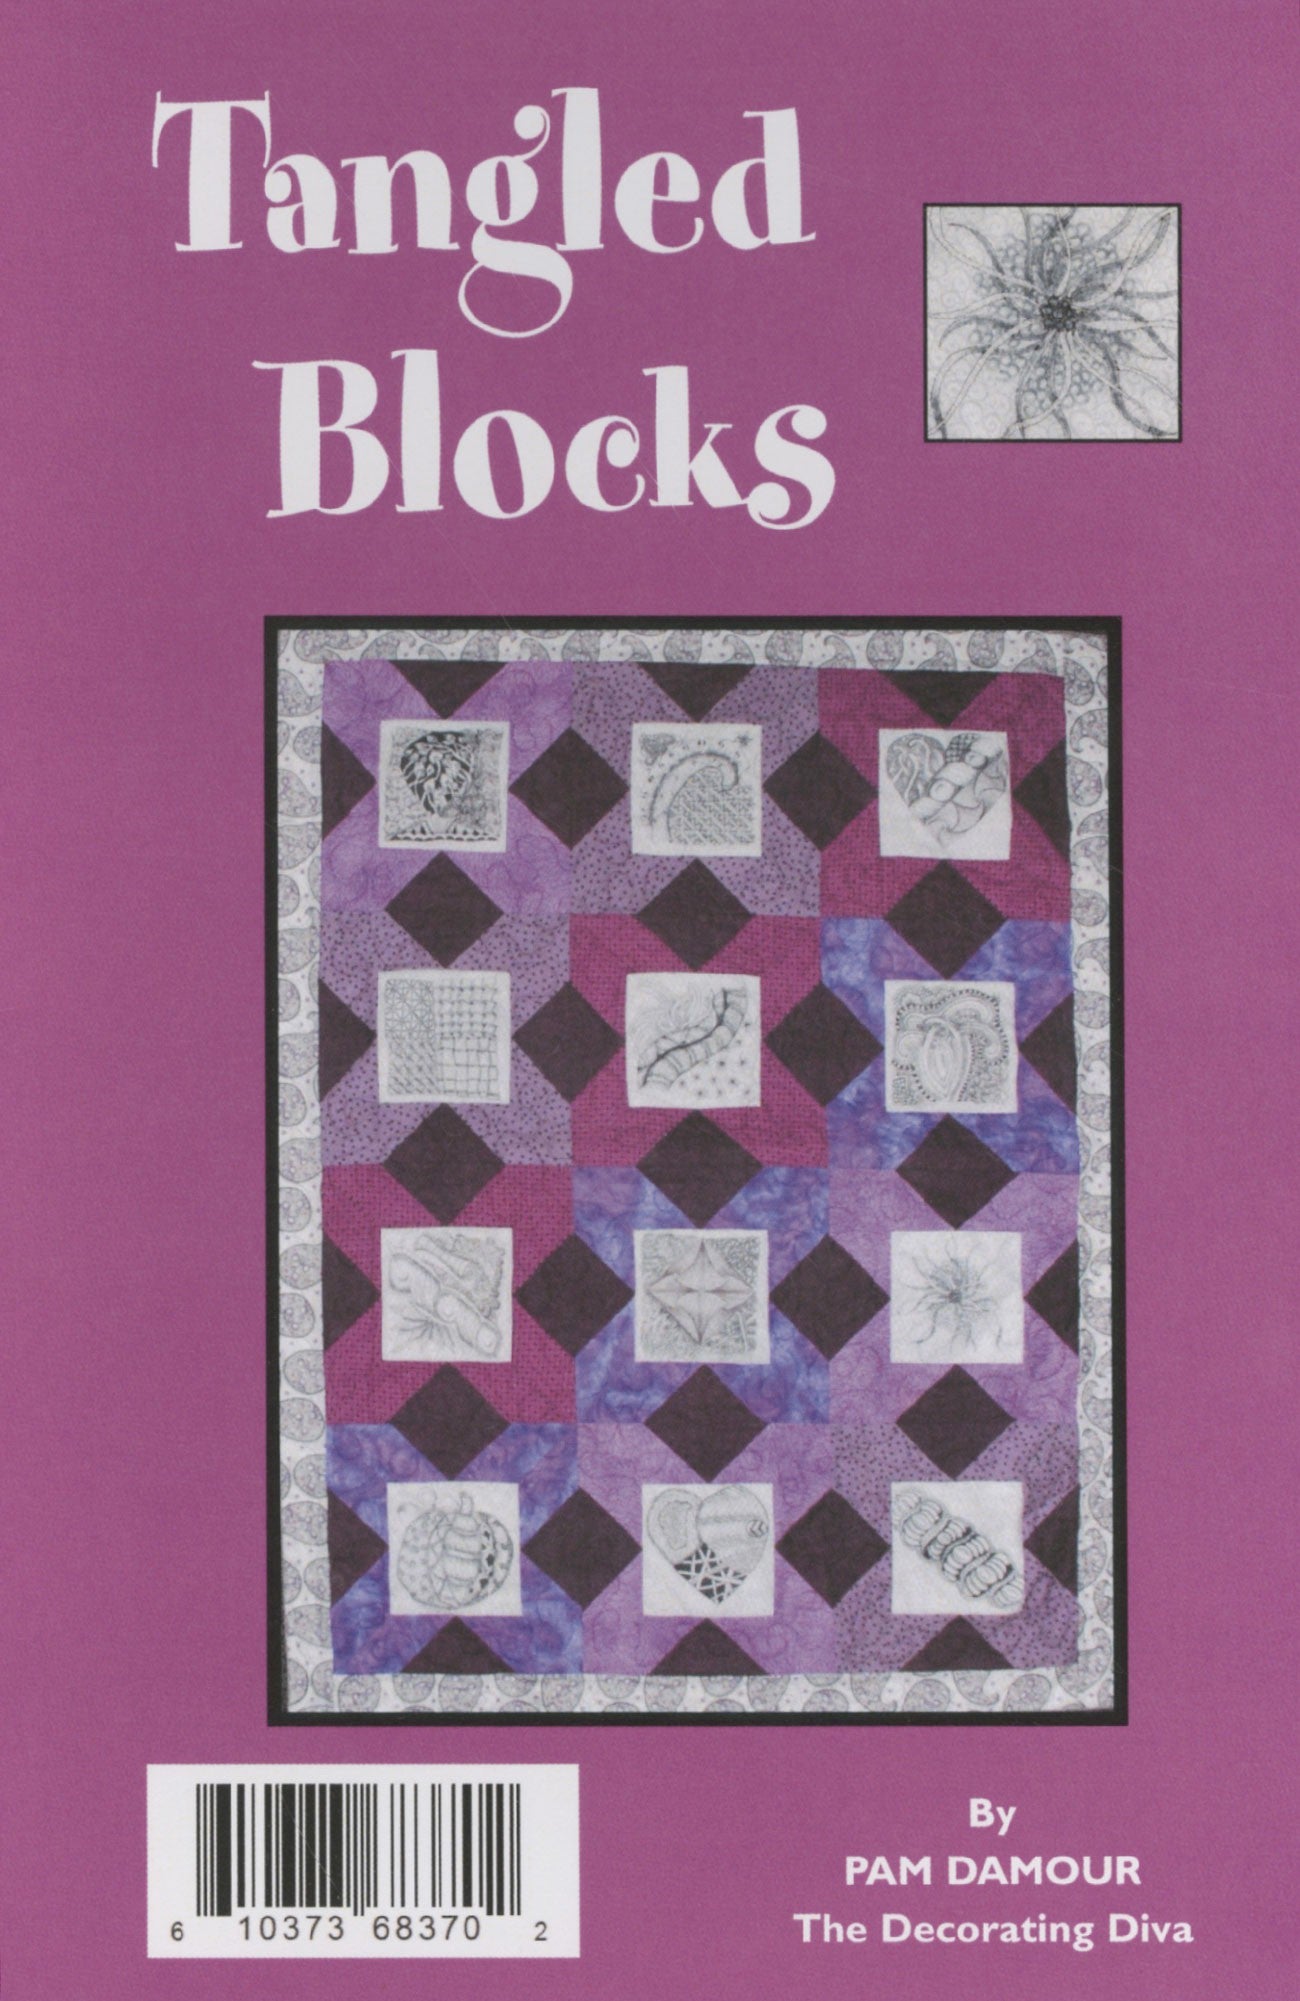 Tangled Blocks Machine Embroidery Designs by Pam Damour for The Decorating Diva